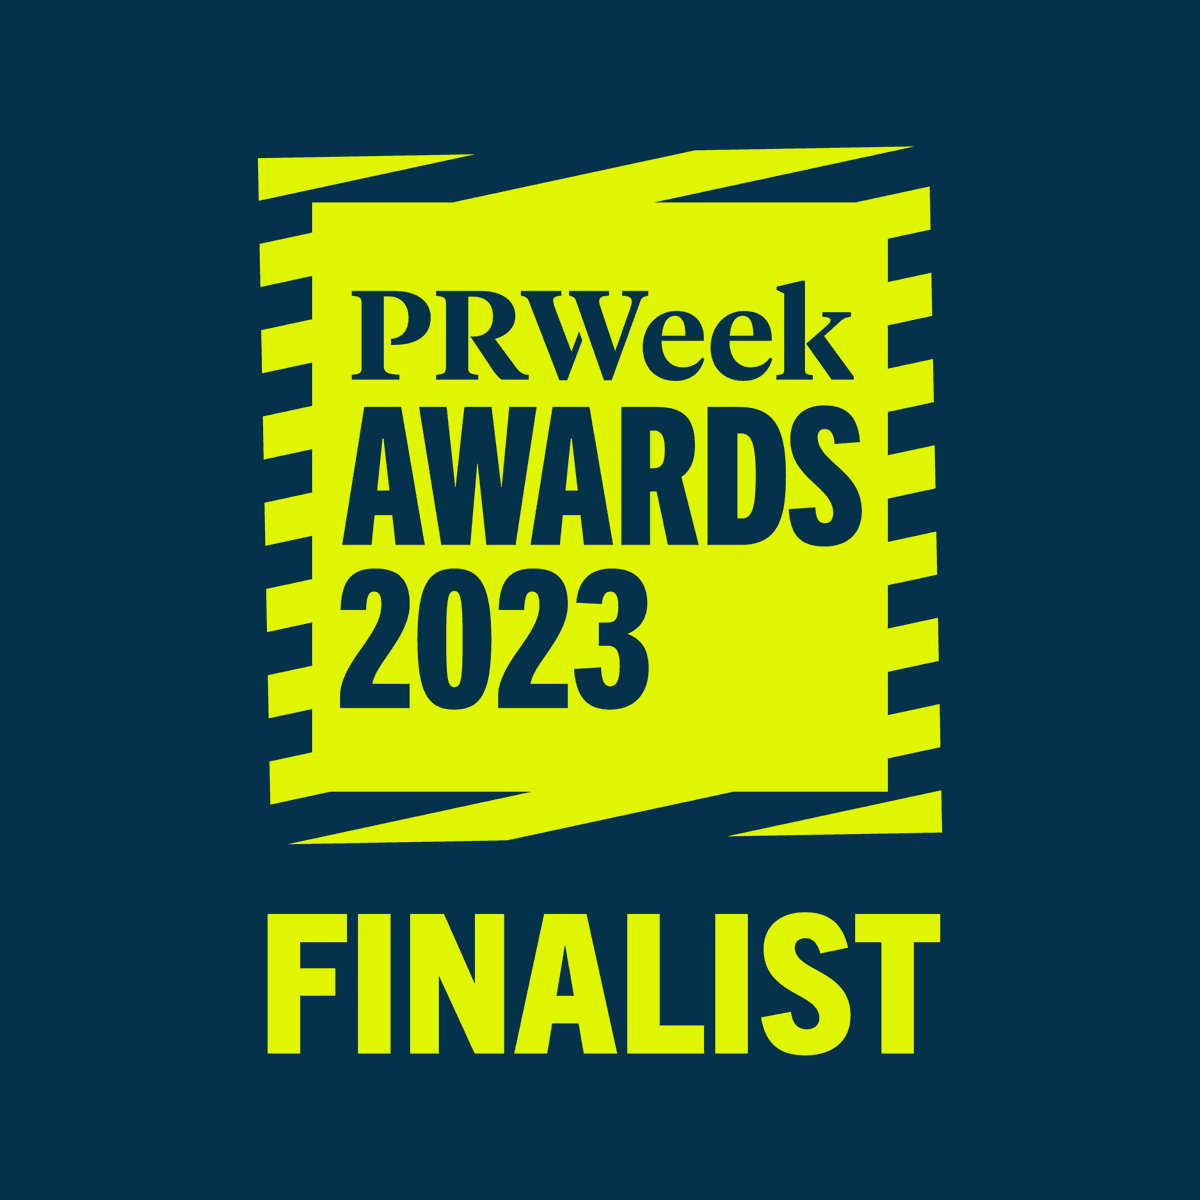 As an agency, we may be midsized, but our impact is large! BPI is proud to have delivered outcomes across the biggest moments in 2022 + we’re honored to be shortlisted for @PRWeekUS Midsize Agency of the Year! Congrats to our fantastic team + thank you to our wonderful clients.🎉